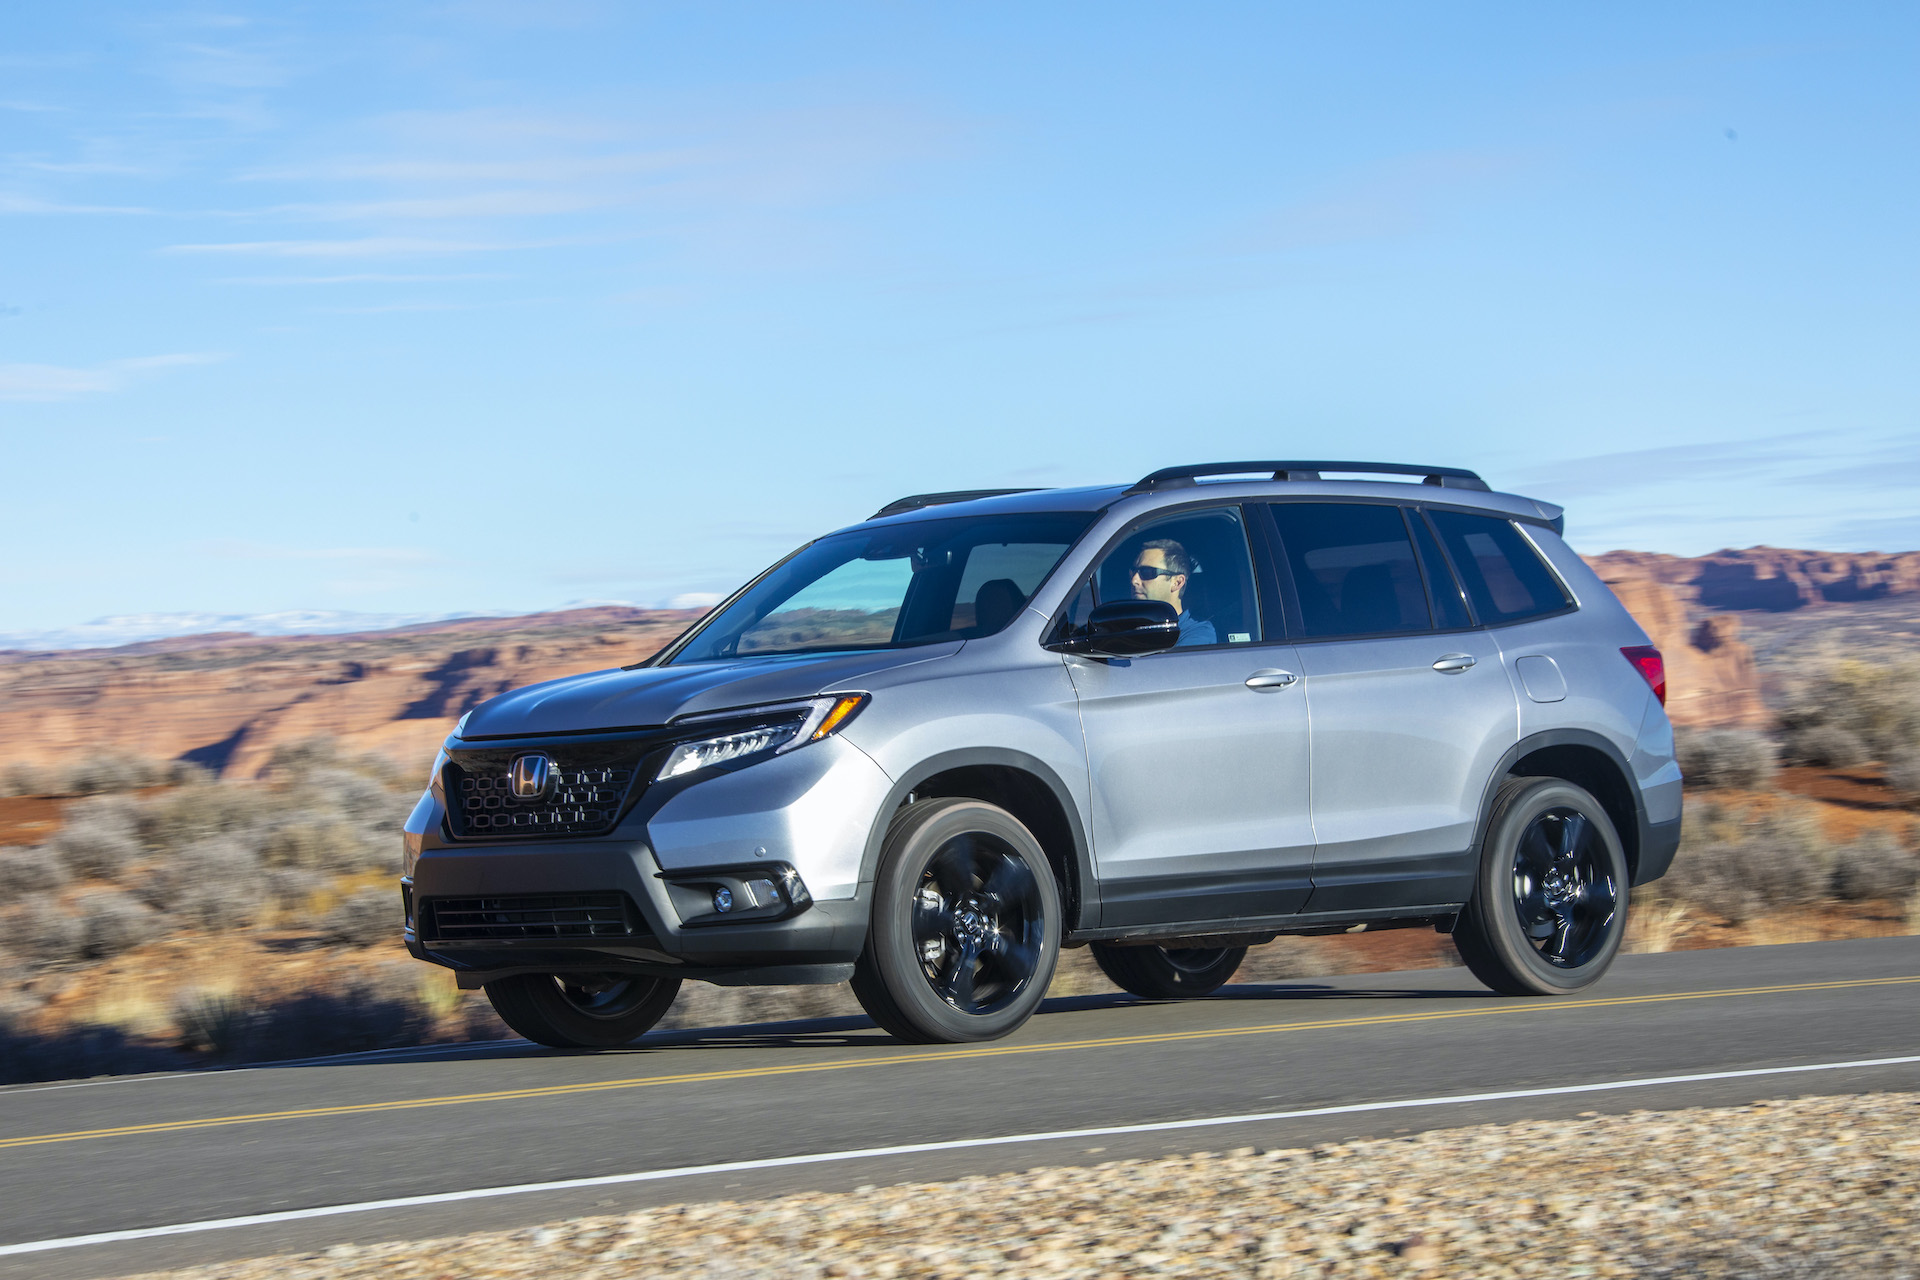 2021 Honda Passport Review Ratings Specs Prices and Photos The 